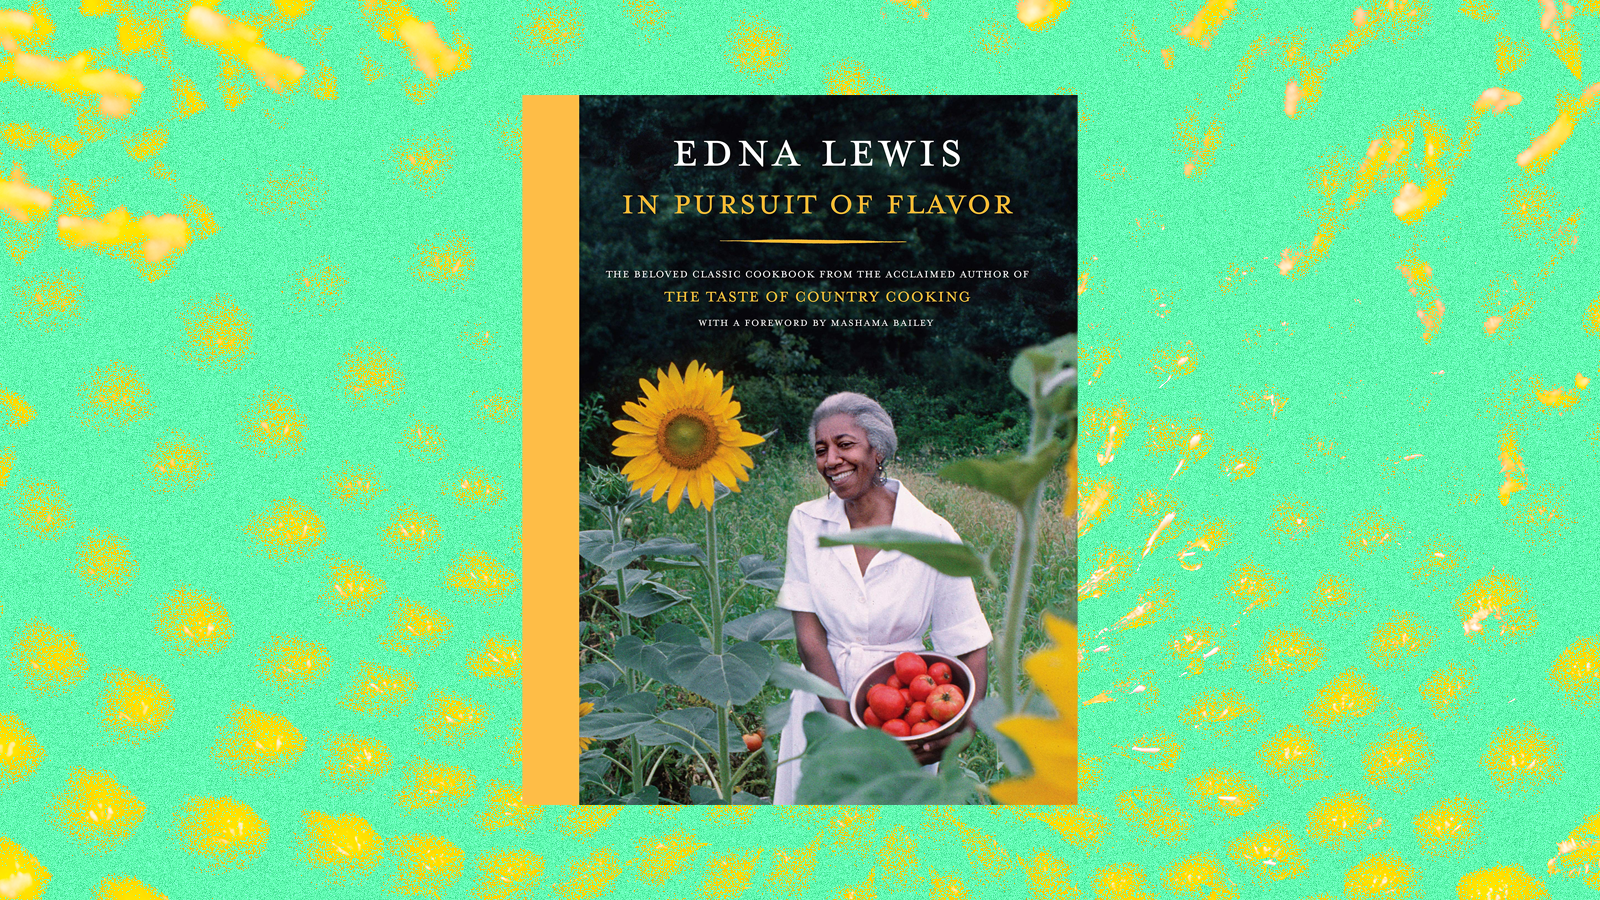 The cover of Edna Lewis’s In Pursuit of Flavor, superimposed over a bright green background. Photo illustration.